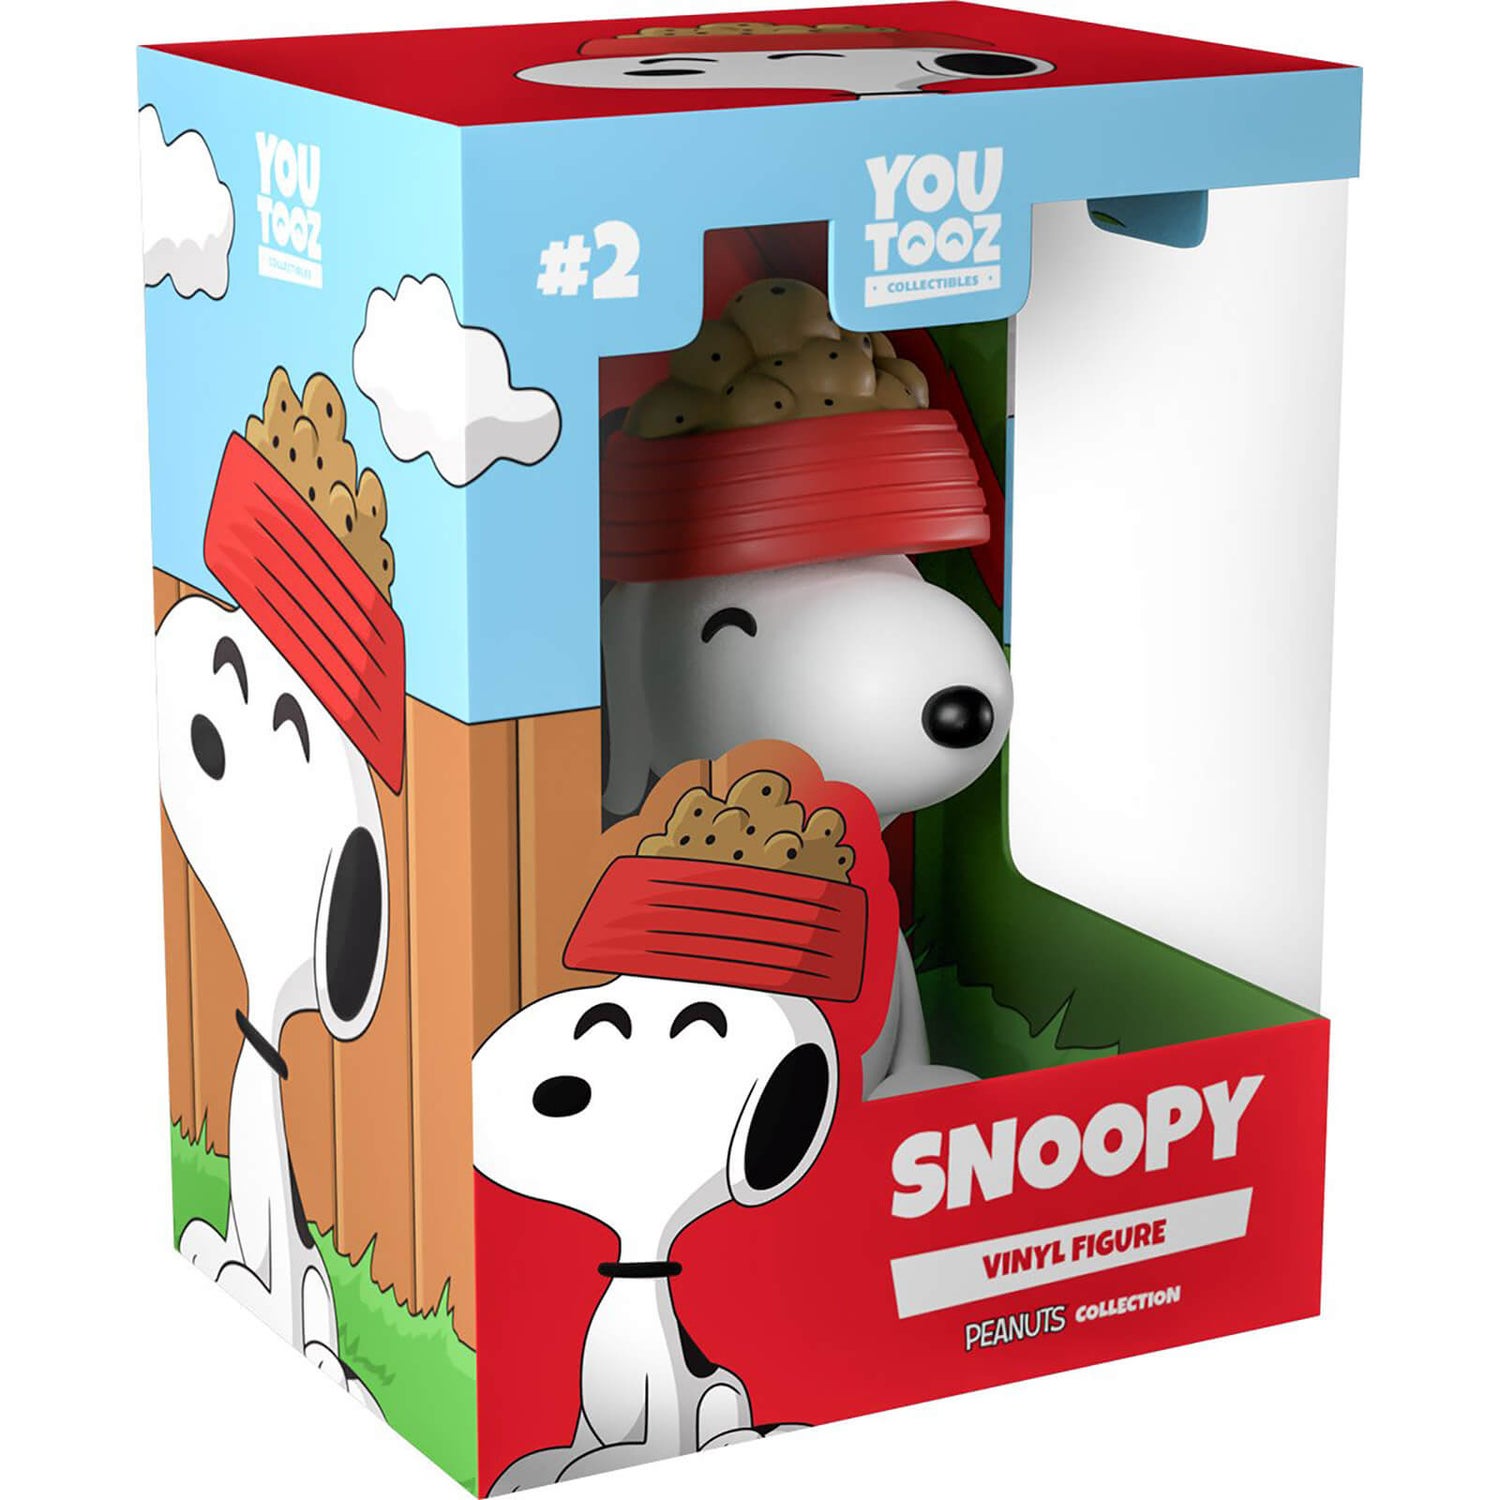 Youtooz Peanuts 5" Vinyl Collectible Figure - Snoopy